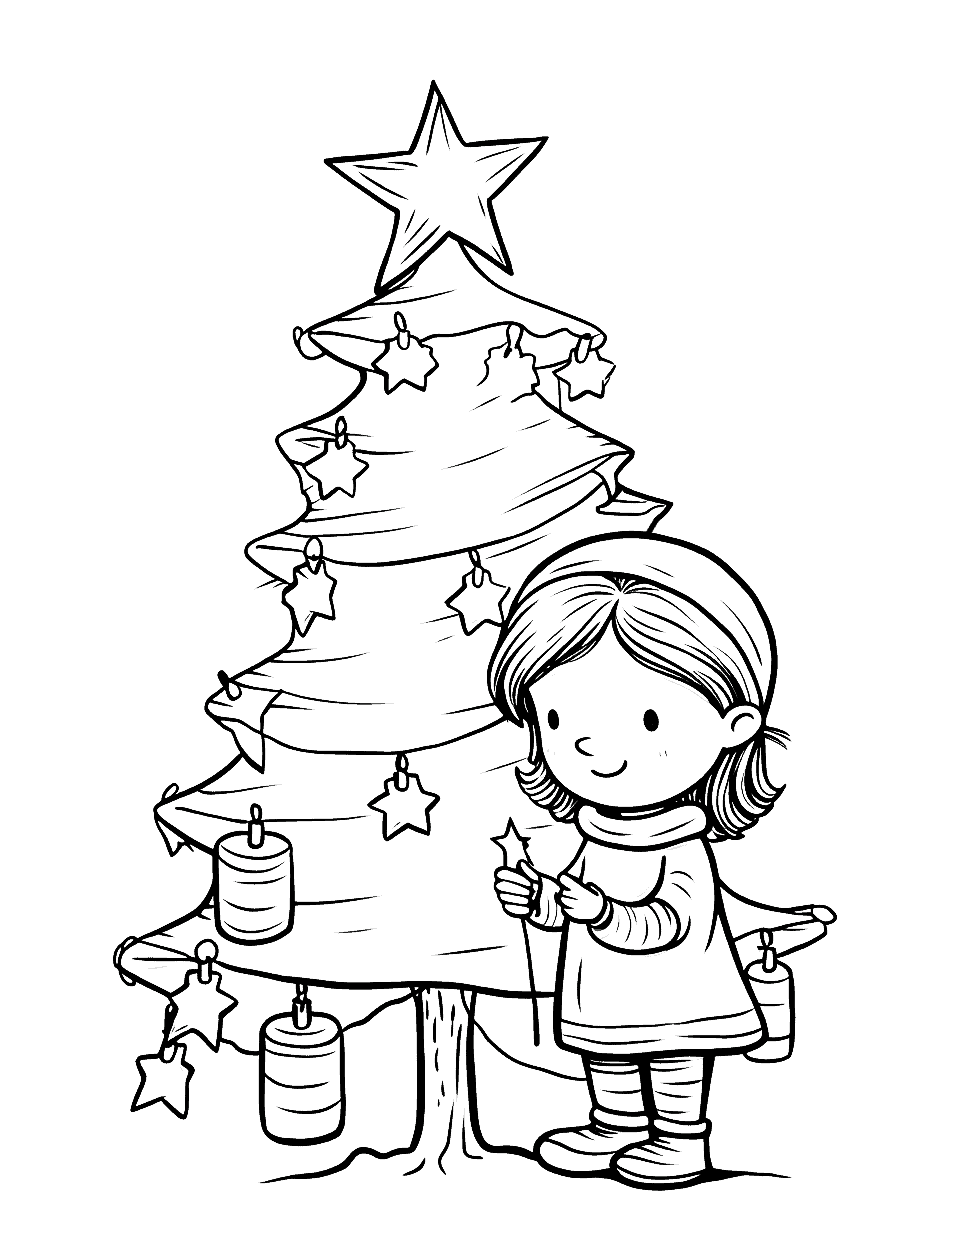 Fairy Lights Christmas Coloring Page - A little girl lighting up a Christmas tree with her magical lights.